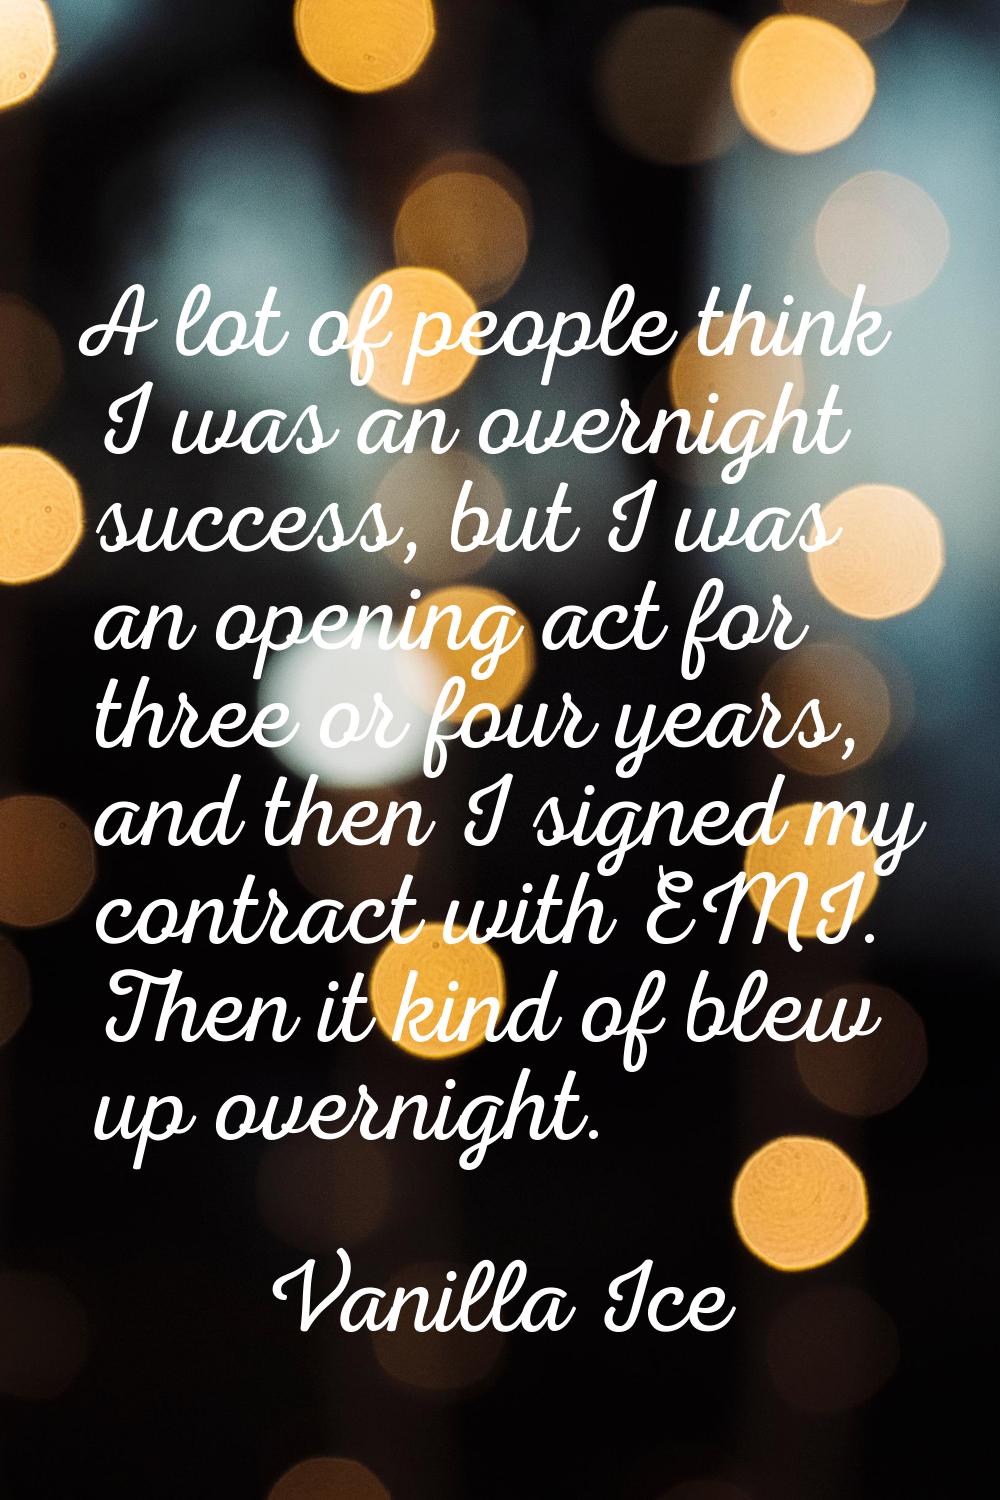 A lot of people think I was an overnight success, but I was an opening act for three or four years,